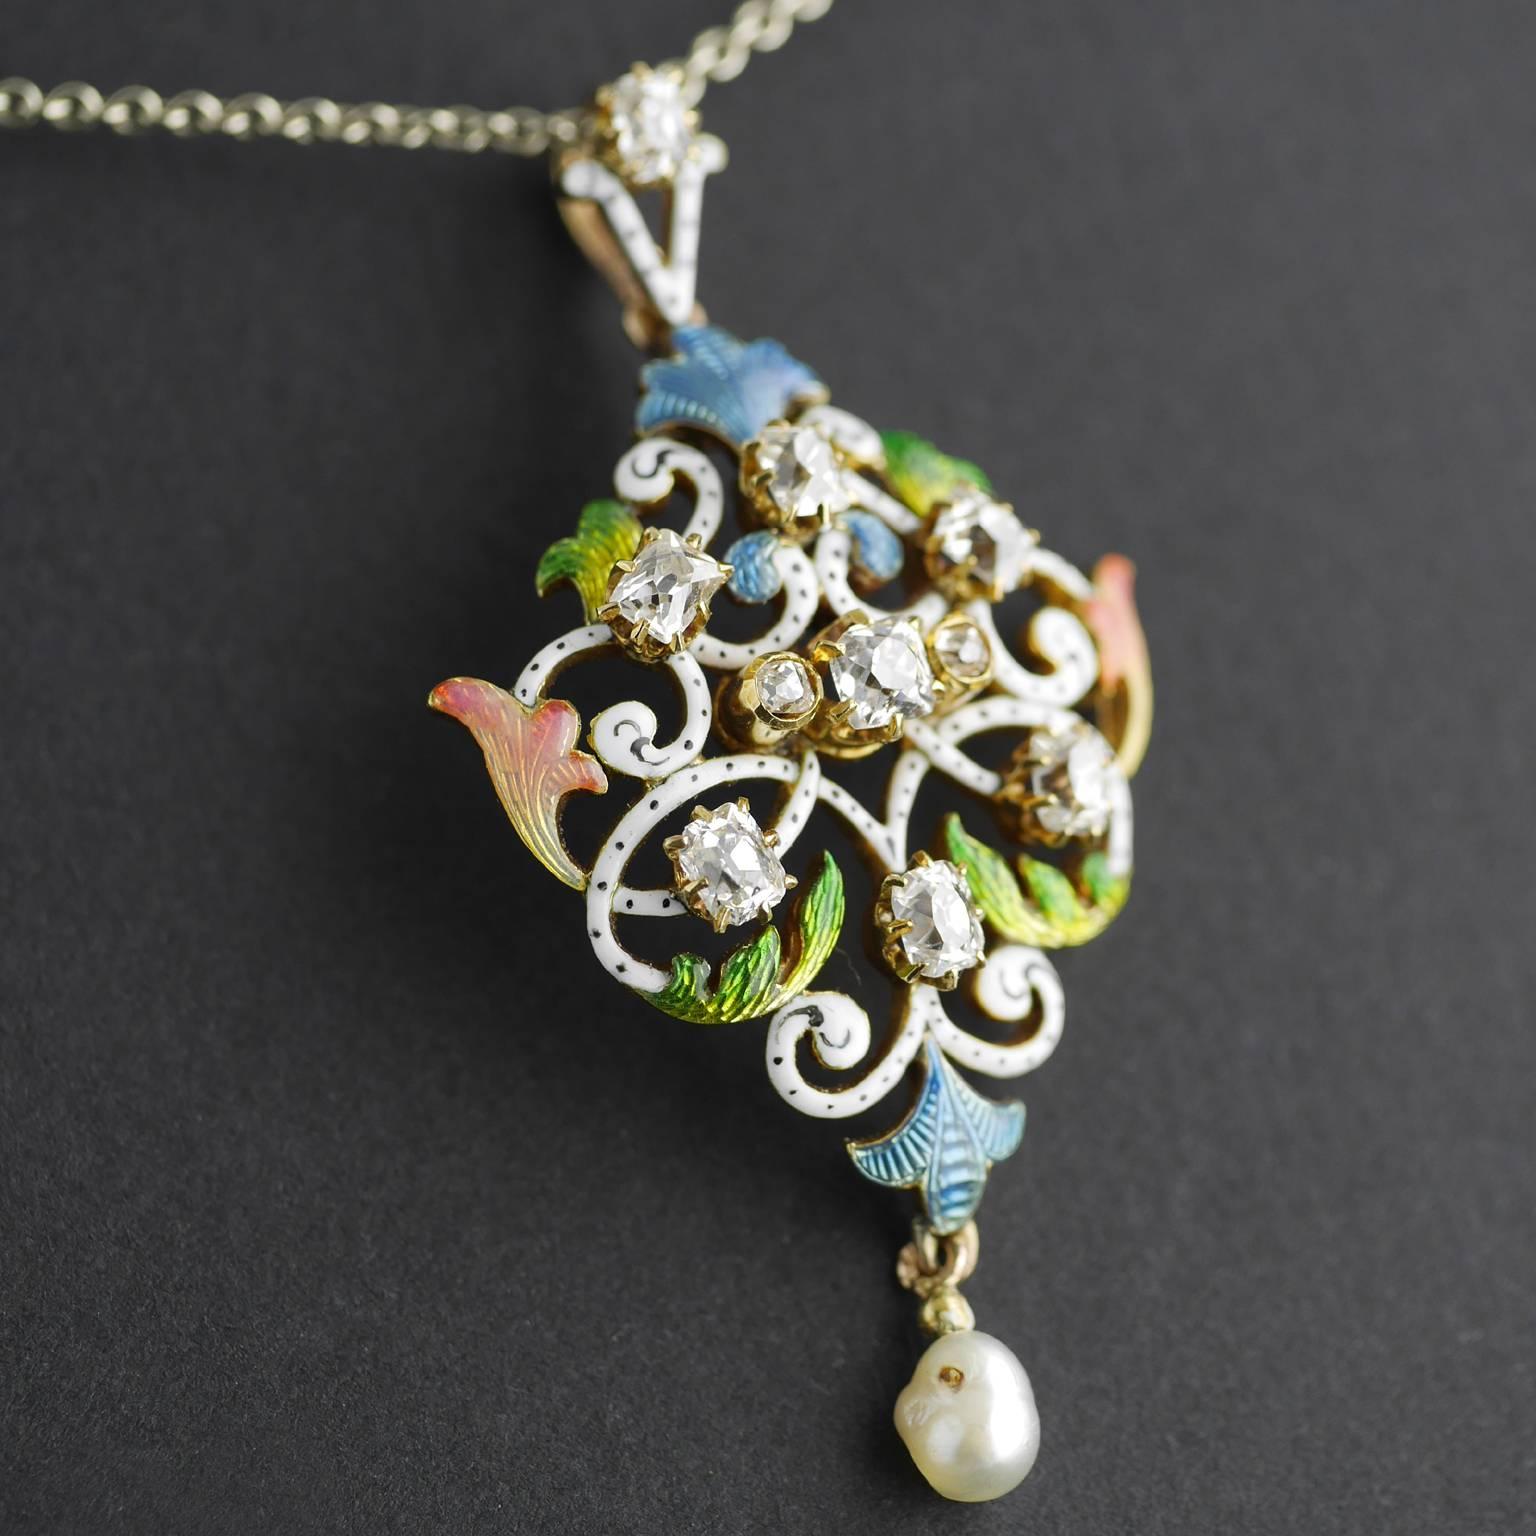 An exquisite, rare and fine Art Nouveau pendant in 18 carat gold, Circa 1900.

18 carat gold set with translucent varicoloured Guilloché enamel with a natural salt water pearl drop.

Eight  principle diamonds, Georgian Table Cut (Very early from